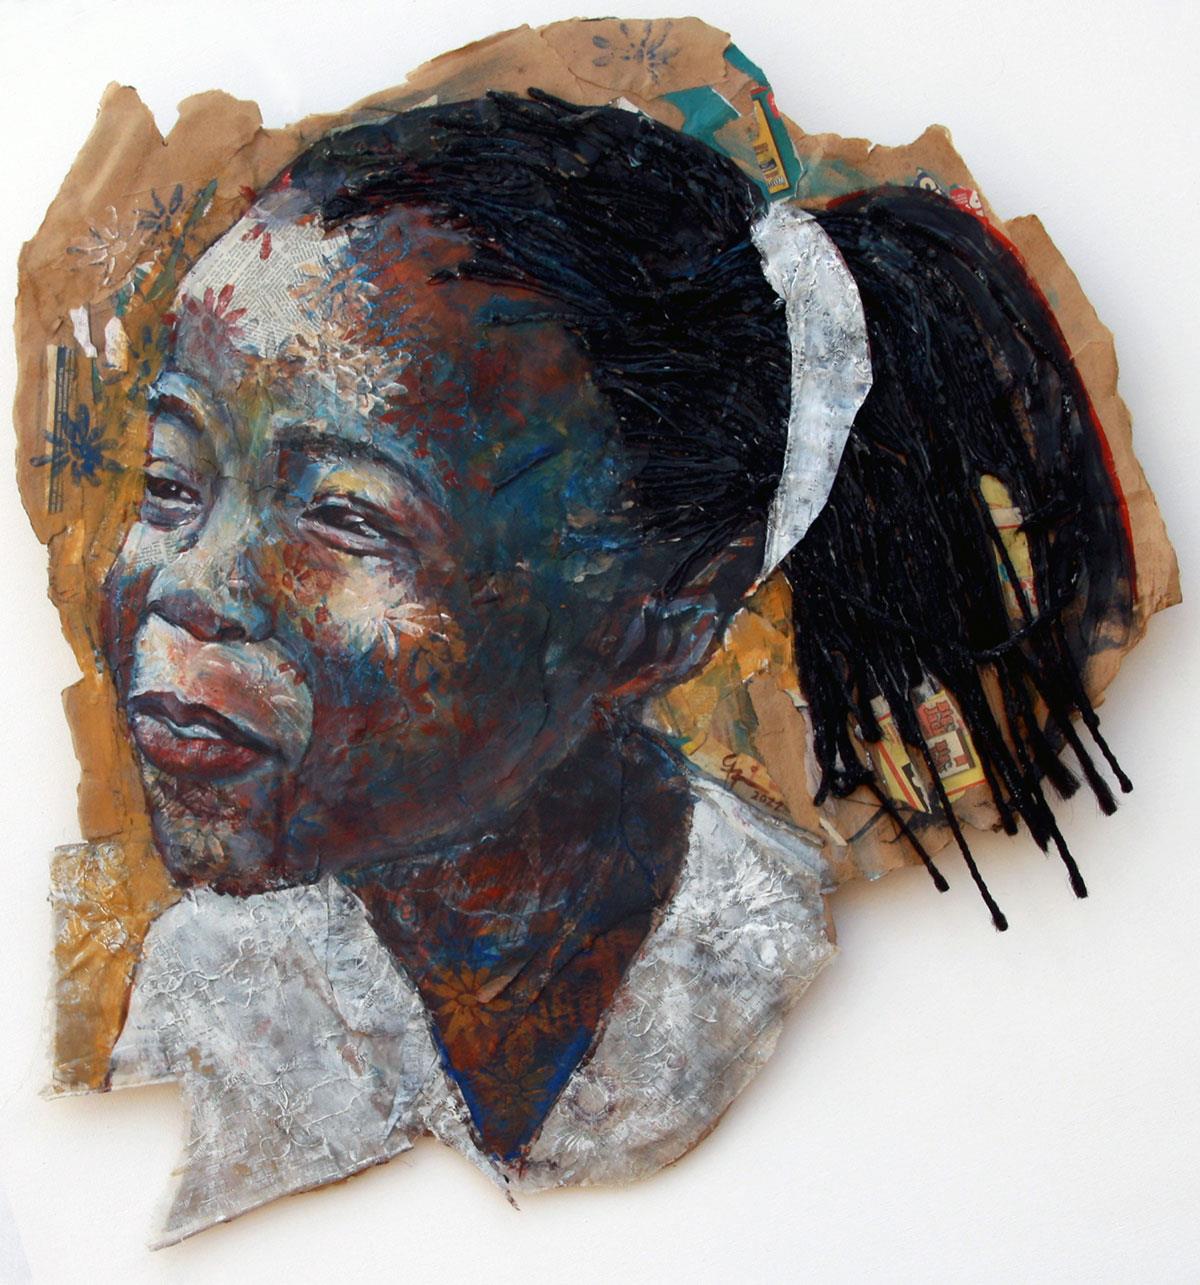 collage artwork of an African girl with braids, smiling joyfully